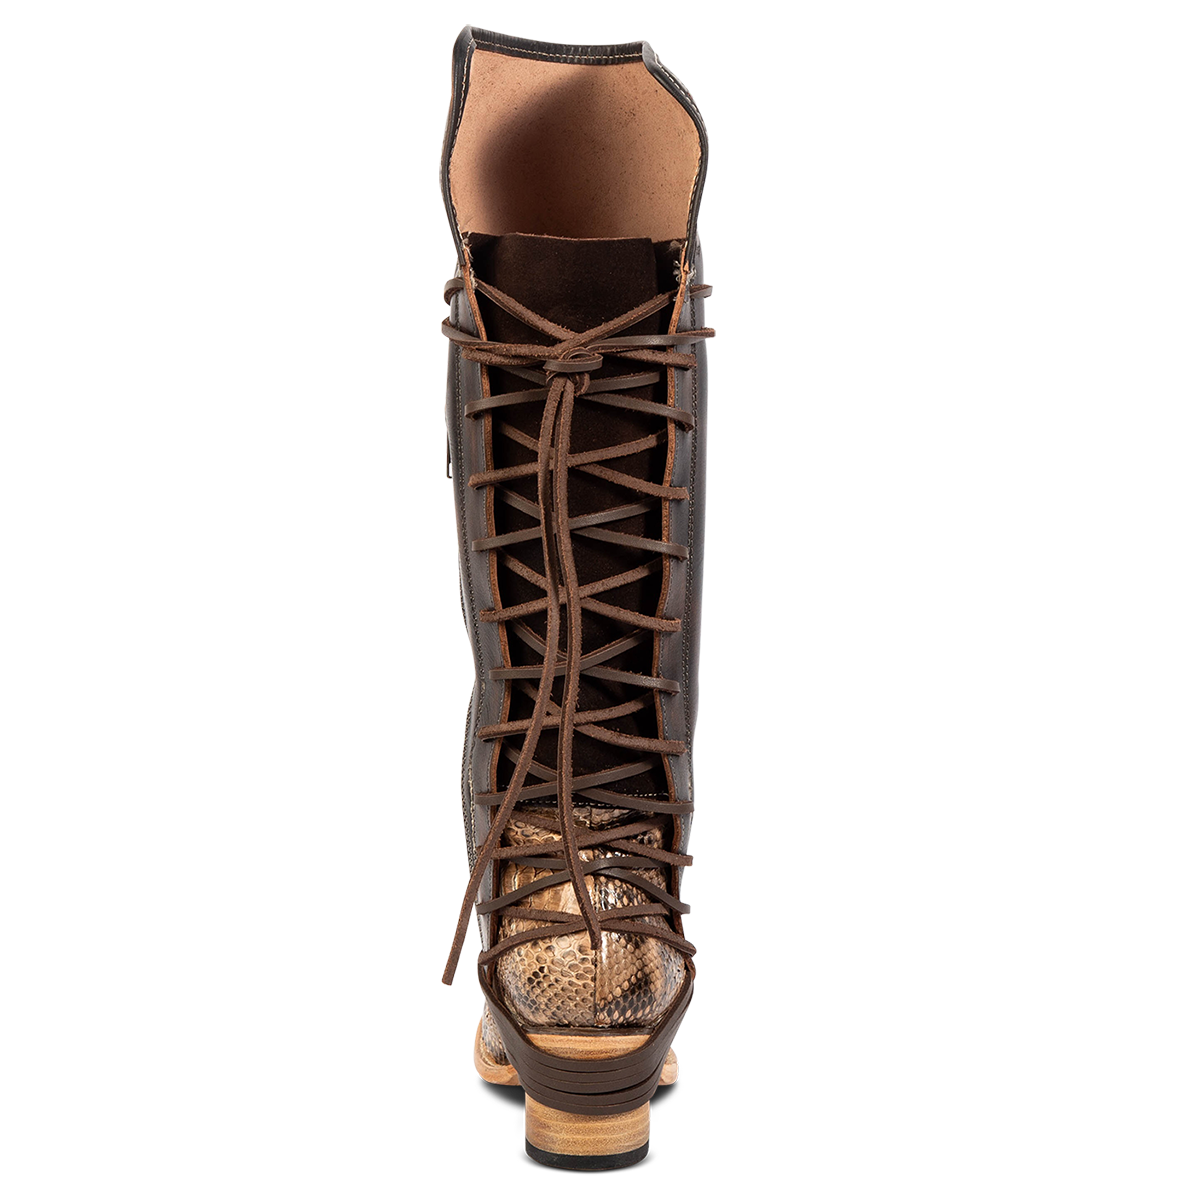 Back view showing expandable panel with adjustable leather lacing on FREEBIRD women's Coal beige python leather tall boot